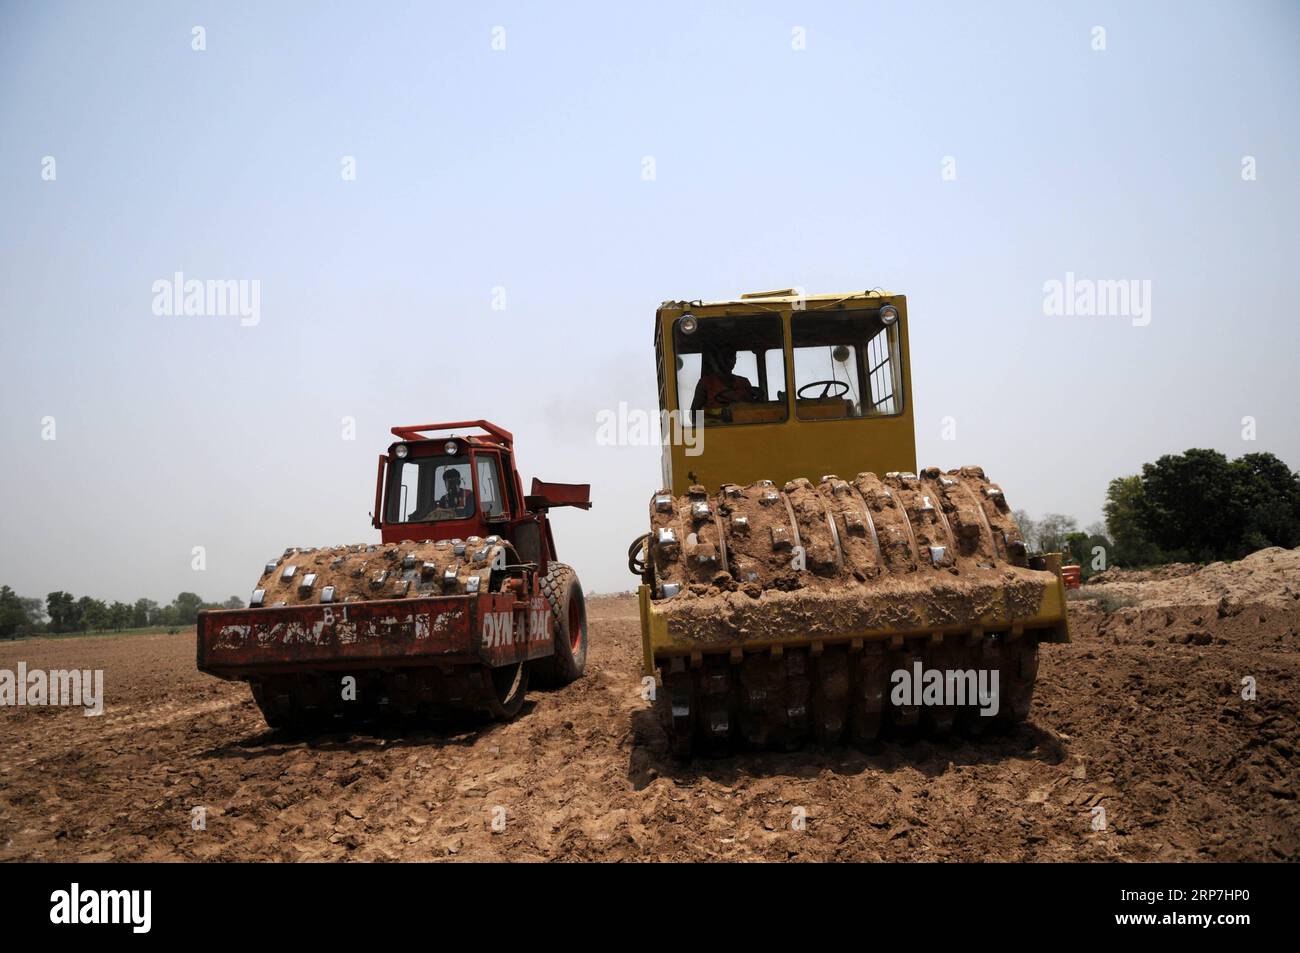 (190207) -- BEIJING, Feb. 7, 2019 -- Two road rollers work on a road construction site near Gojra, Pakistan, June 26, 2016. Pakistani Prime Minister Imran Khan said on Wednesday that the China-Pakistan Economic Corridor (CPEC) will bring a host of economic opportunities for the country s southwest Balochistan province, local reports said. During his conversation with political representatives of the Balochistan Awami Party, the prime minister said that development of Gwadar port will open a new era of prosperity in Balochistan by creating vast opportunities for the people of the province, ARY Stock Photo